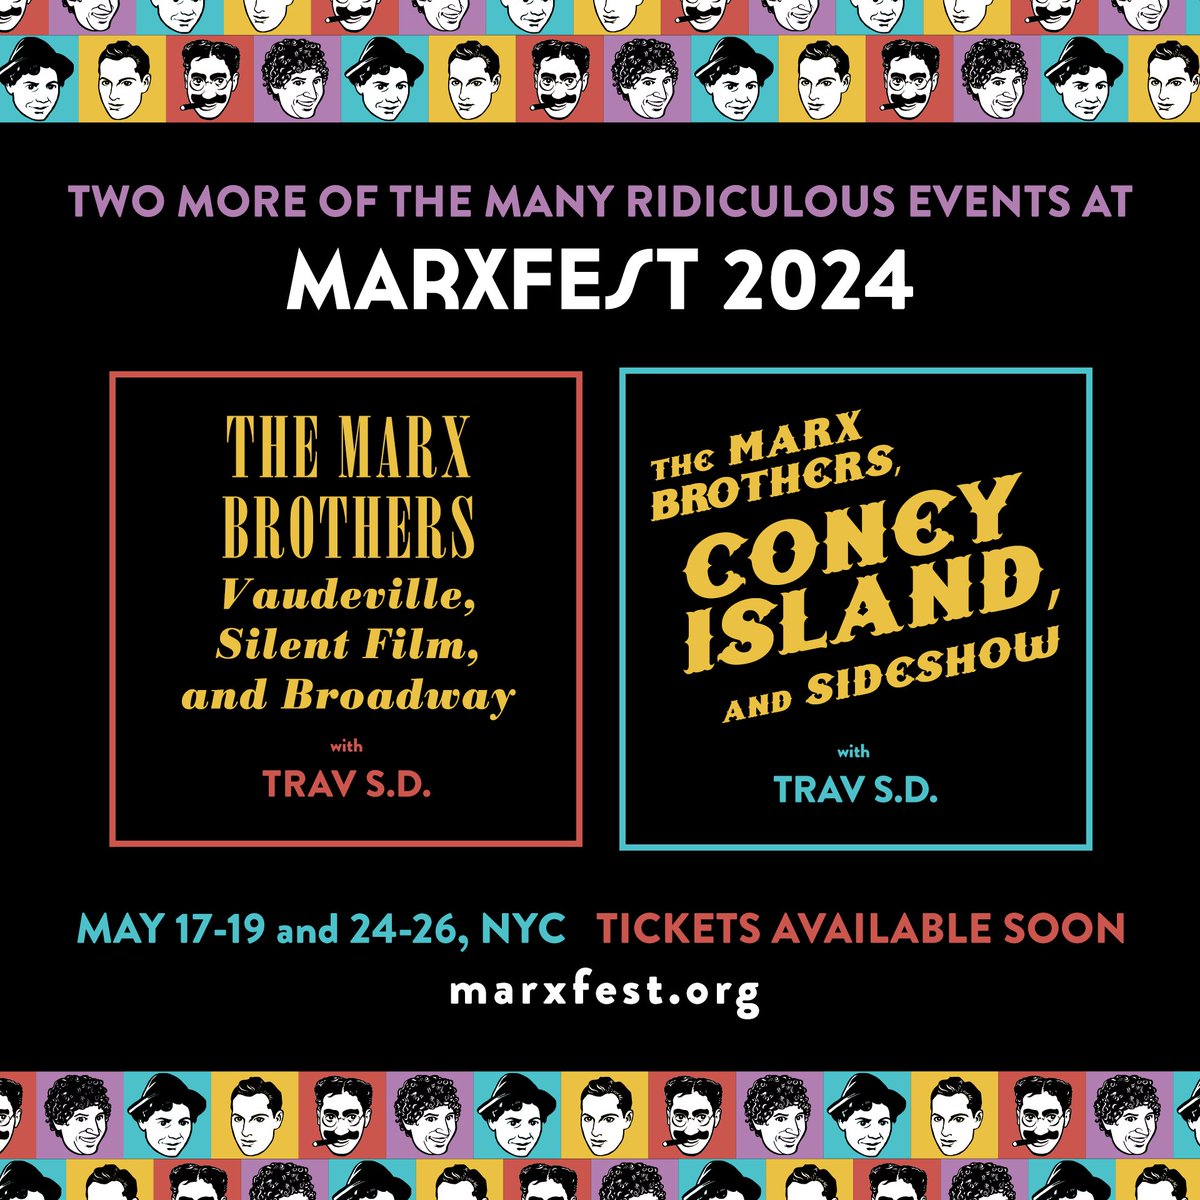 More ridiculous events: Marxfest 2024 shall feature TWO outstanding @TravSD talks! ⭐️ THE MARX BROTHERS: VAUDEVILLE, SILENT FILM, AND BROADWAY! ⭐️ THE MARX BROTHERS, CONEY ISLAND, AND SIDESHOW! So join our mailing list at marxfest.org -- what could it hurt?